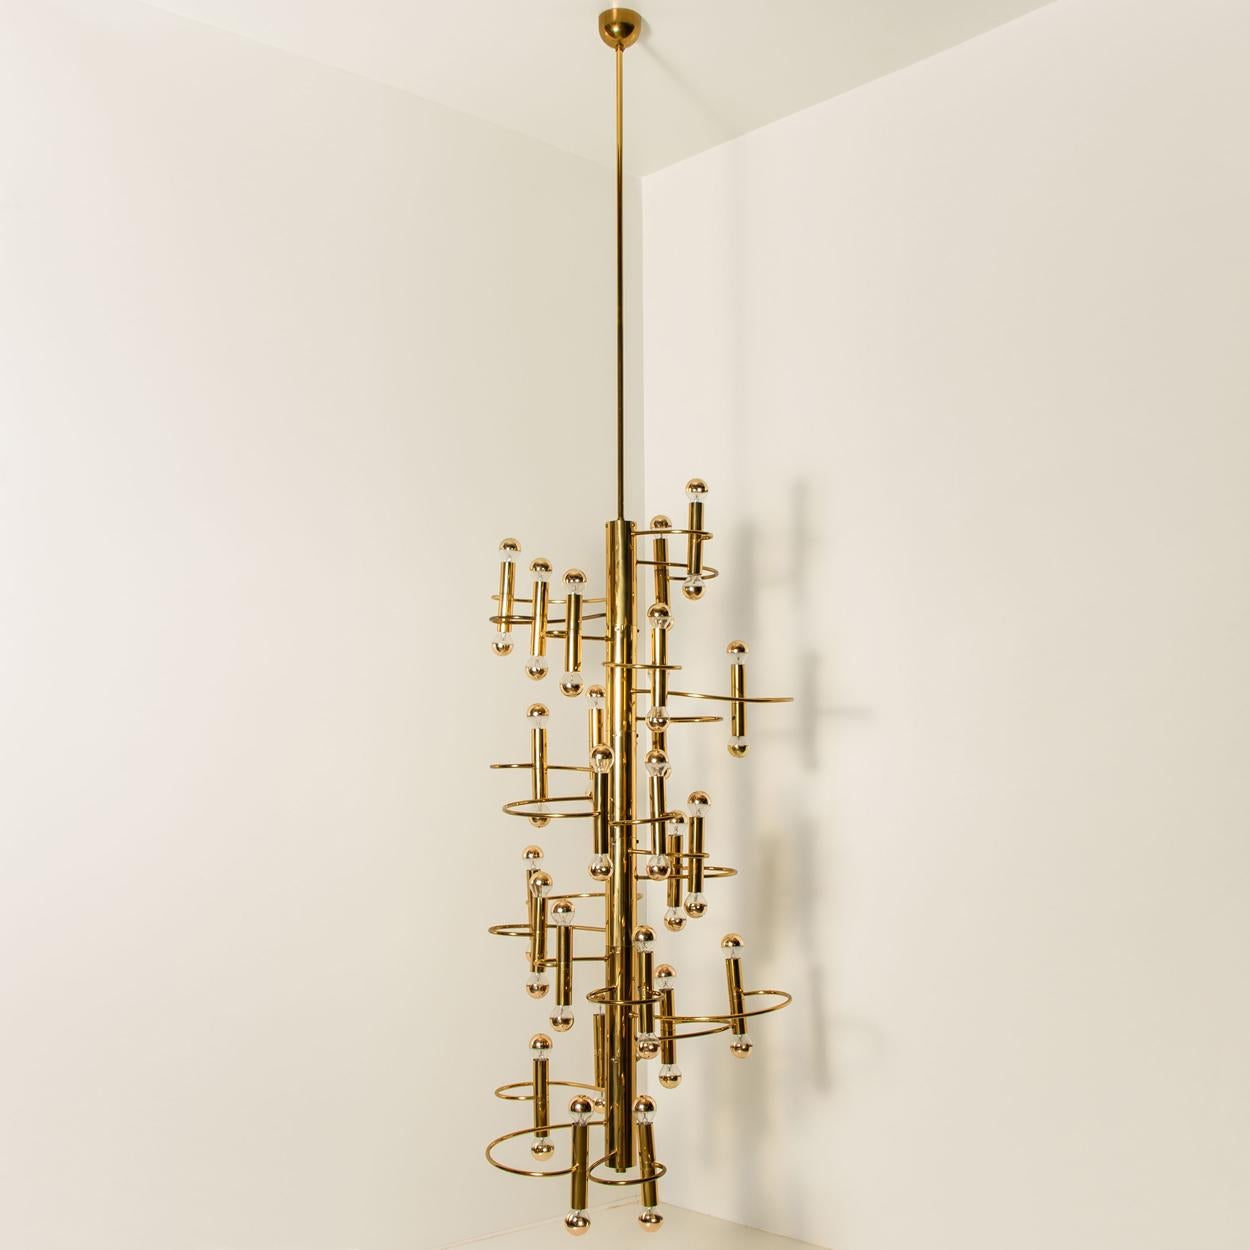 Impressive sculptural extra large brass ceiling fixture light flush mount lamp by Leola for Sciolari, 1970s
A unique high-end piece from the 20th century. I unique opportunity.

You can make your own stunning staircase solution. We can change rod